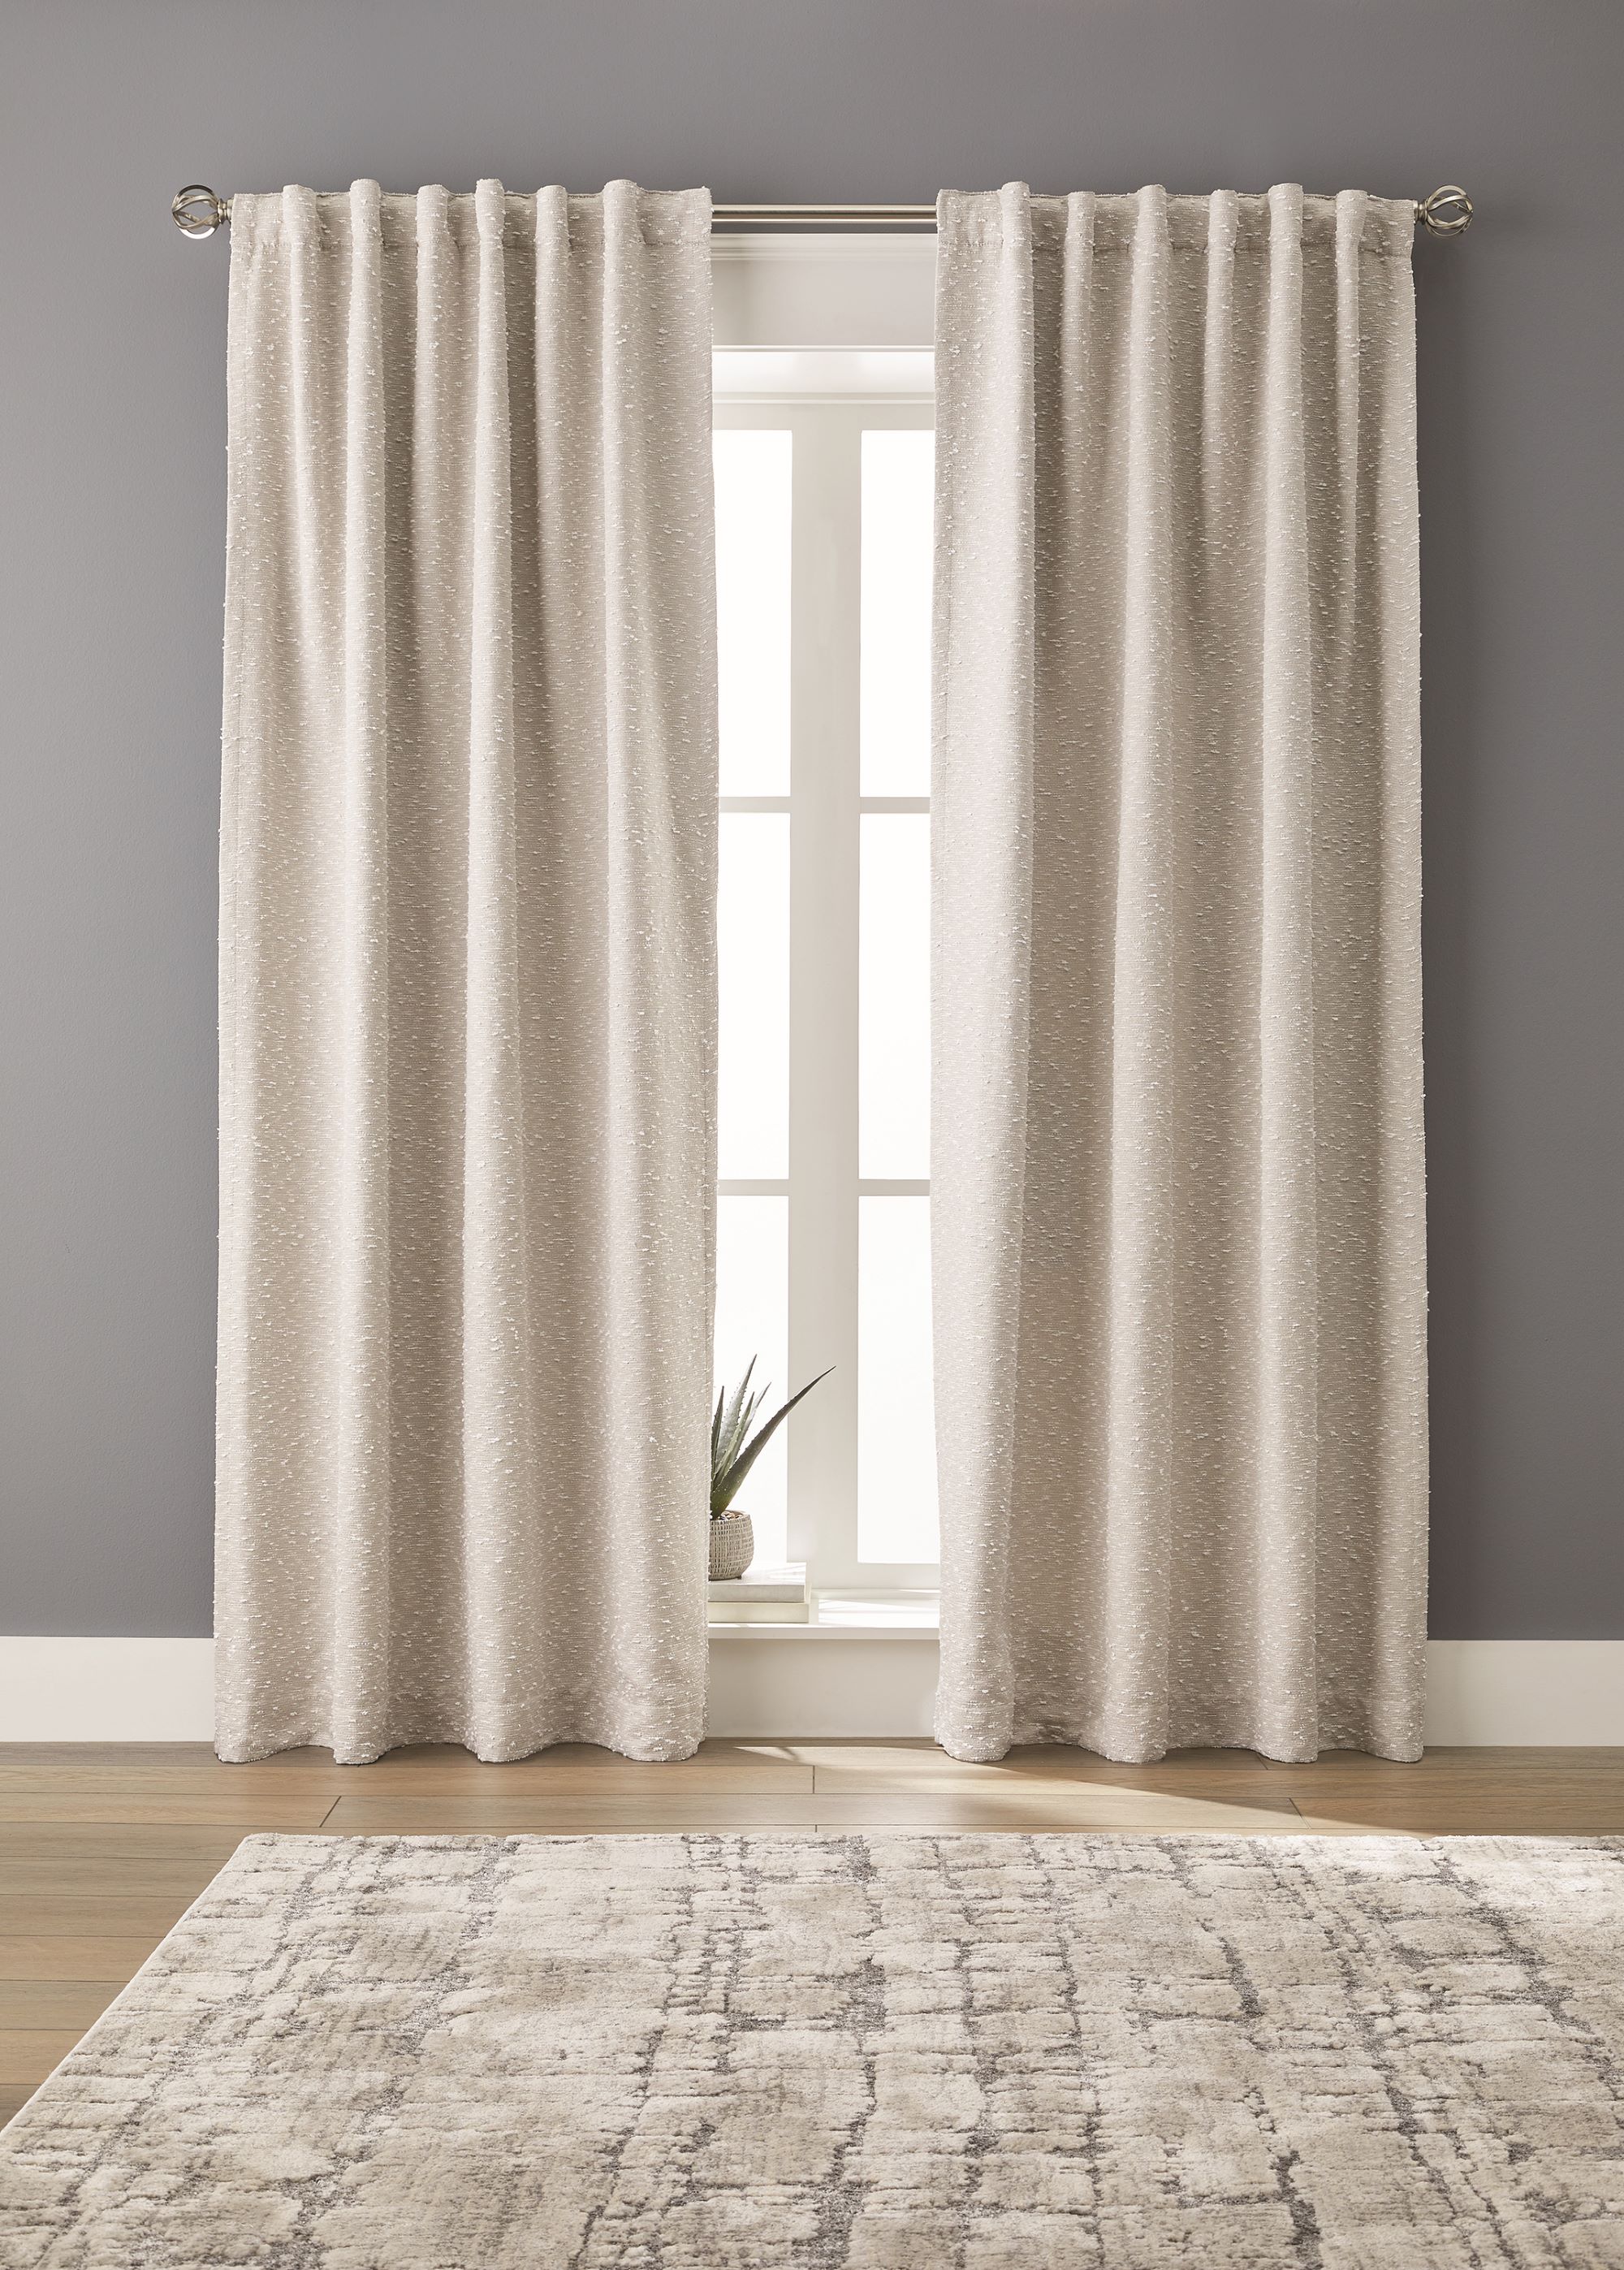 Better Homes & Gardens Boucle Blackout Curtain Panel, 50" x 95", Beige Polyester - image 1 of 7